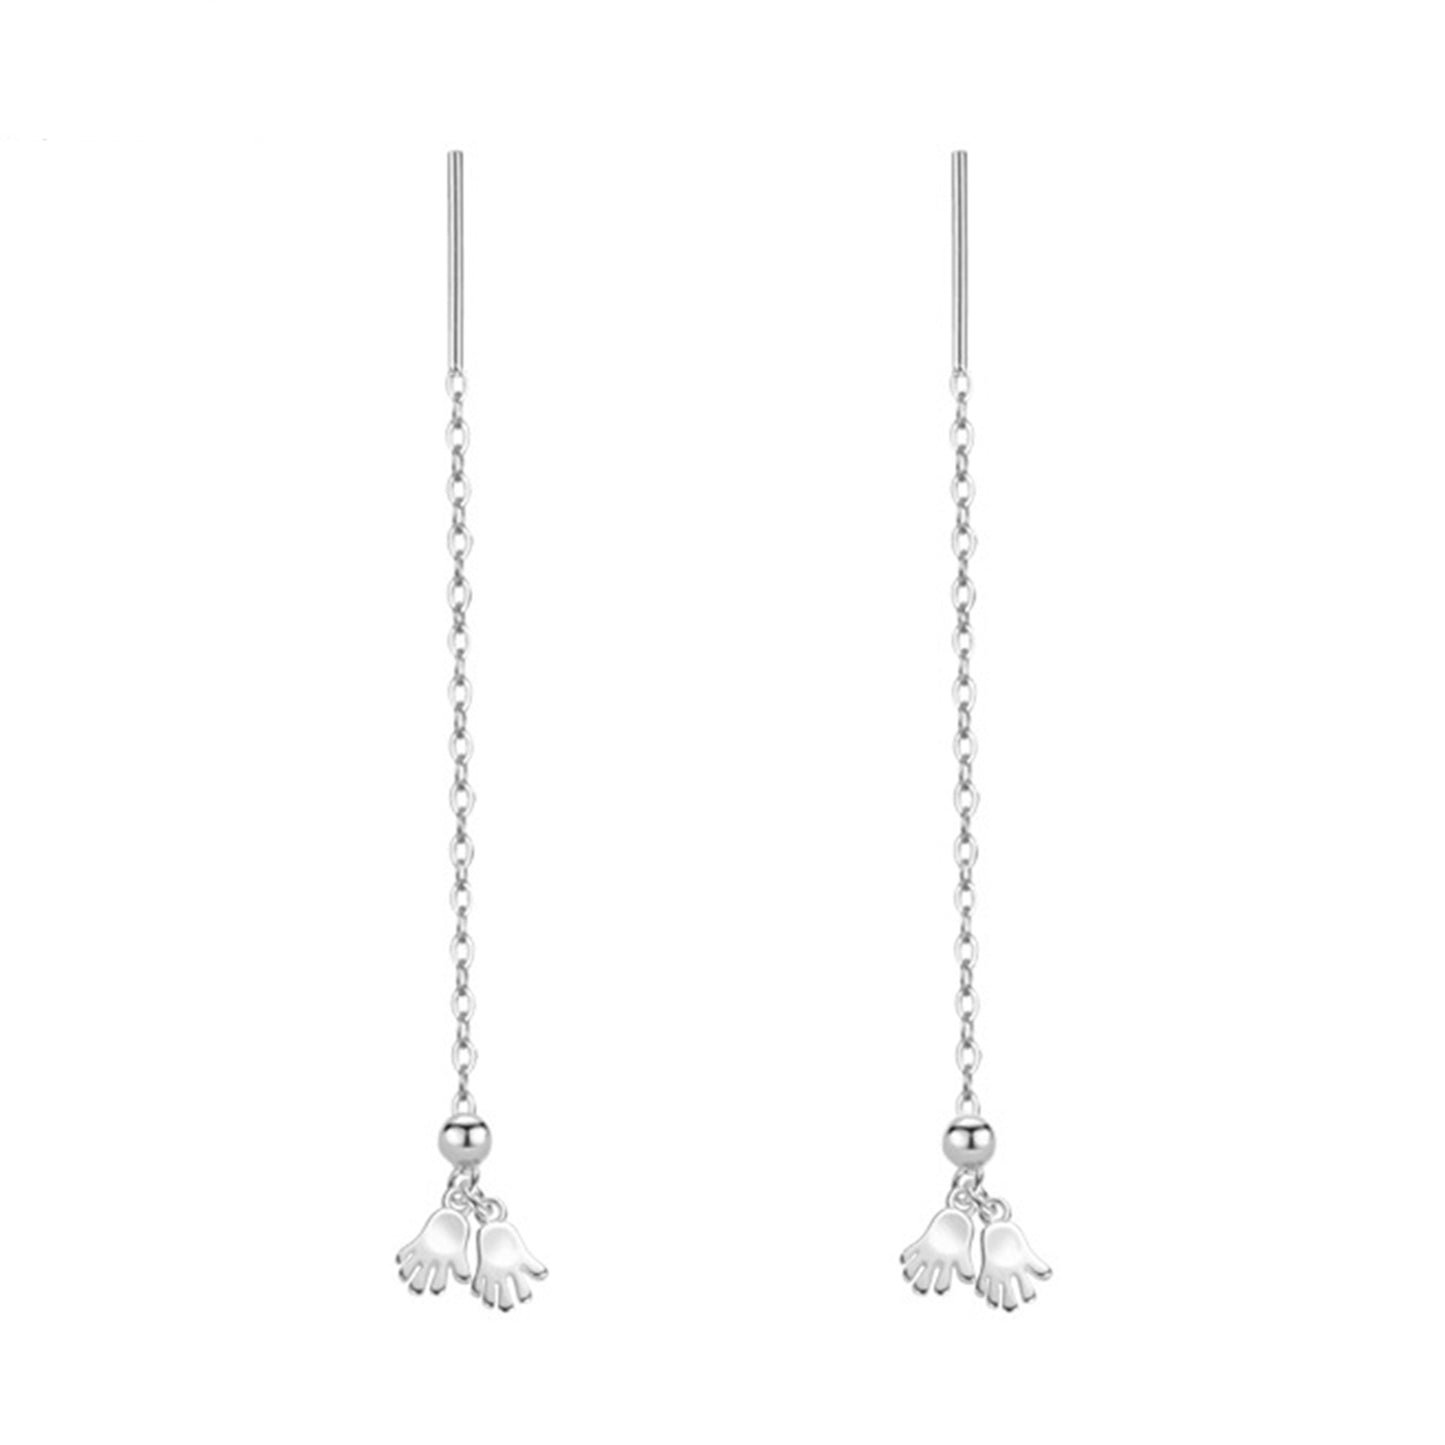 Sterling Silver Hands Threader Earrings with Beaded Pull-Through Chain - sugarkittenlondon